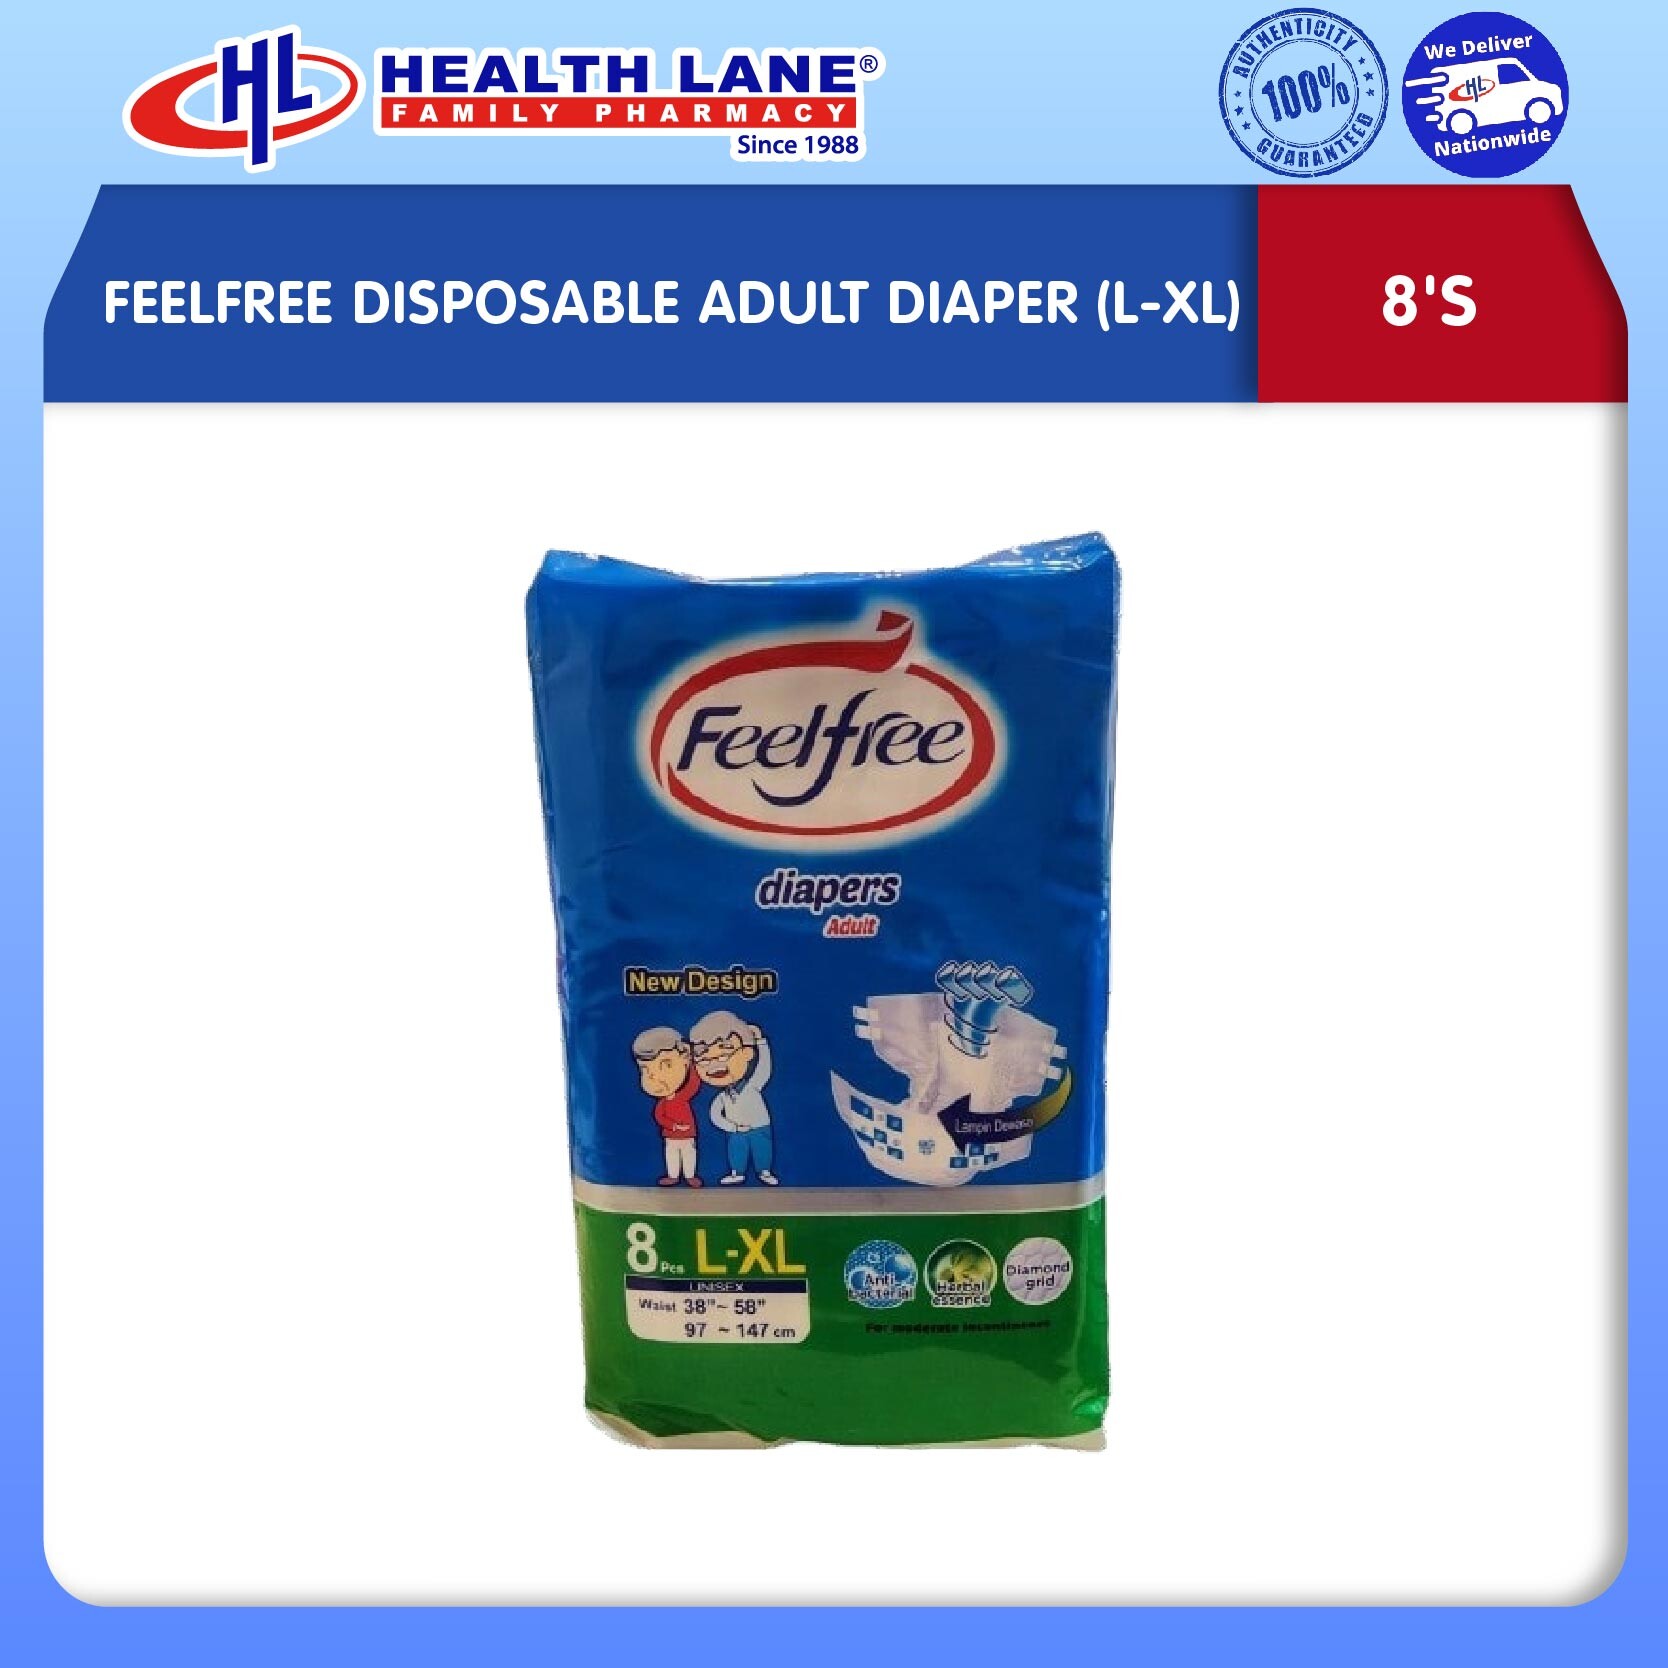 FEELFREE DISPOSABLE ADULT DIAPER 8'S (L-XL) 